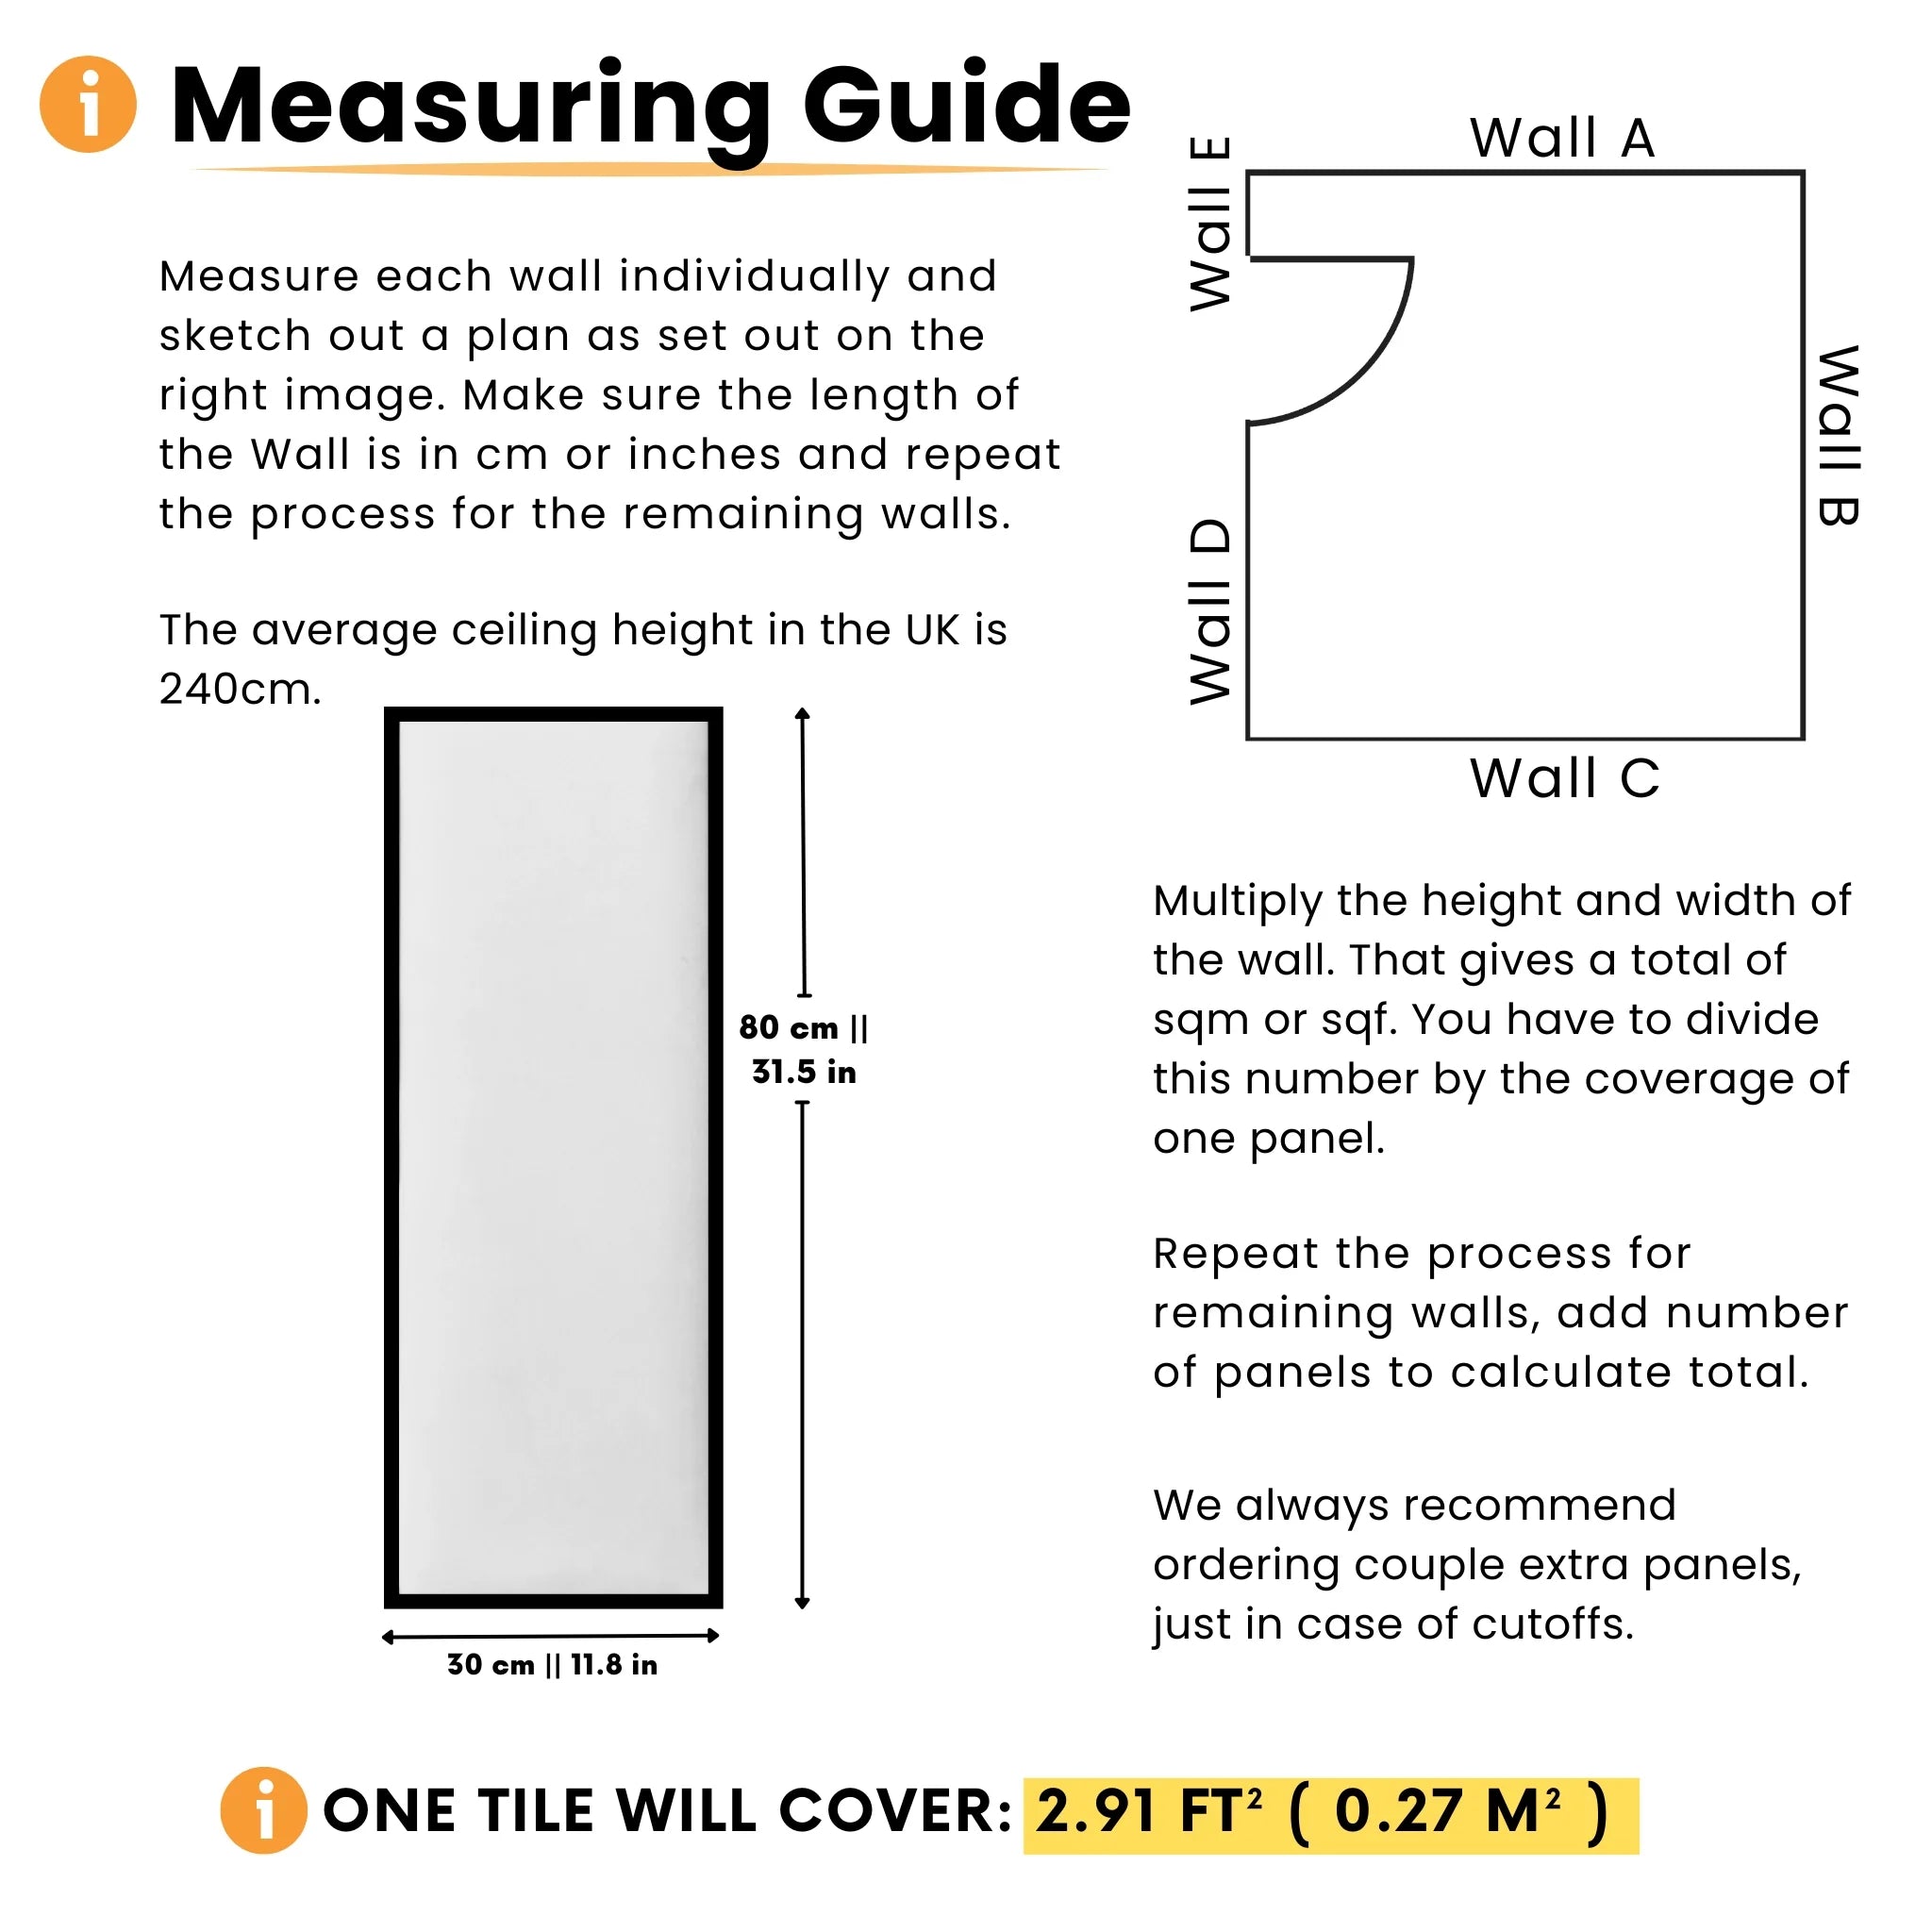 Measuring guide for upholstered wall panels, dimensions and coverage area